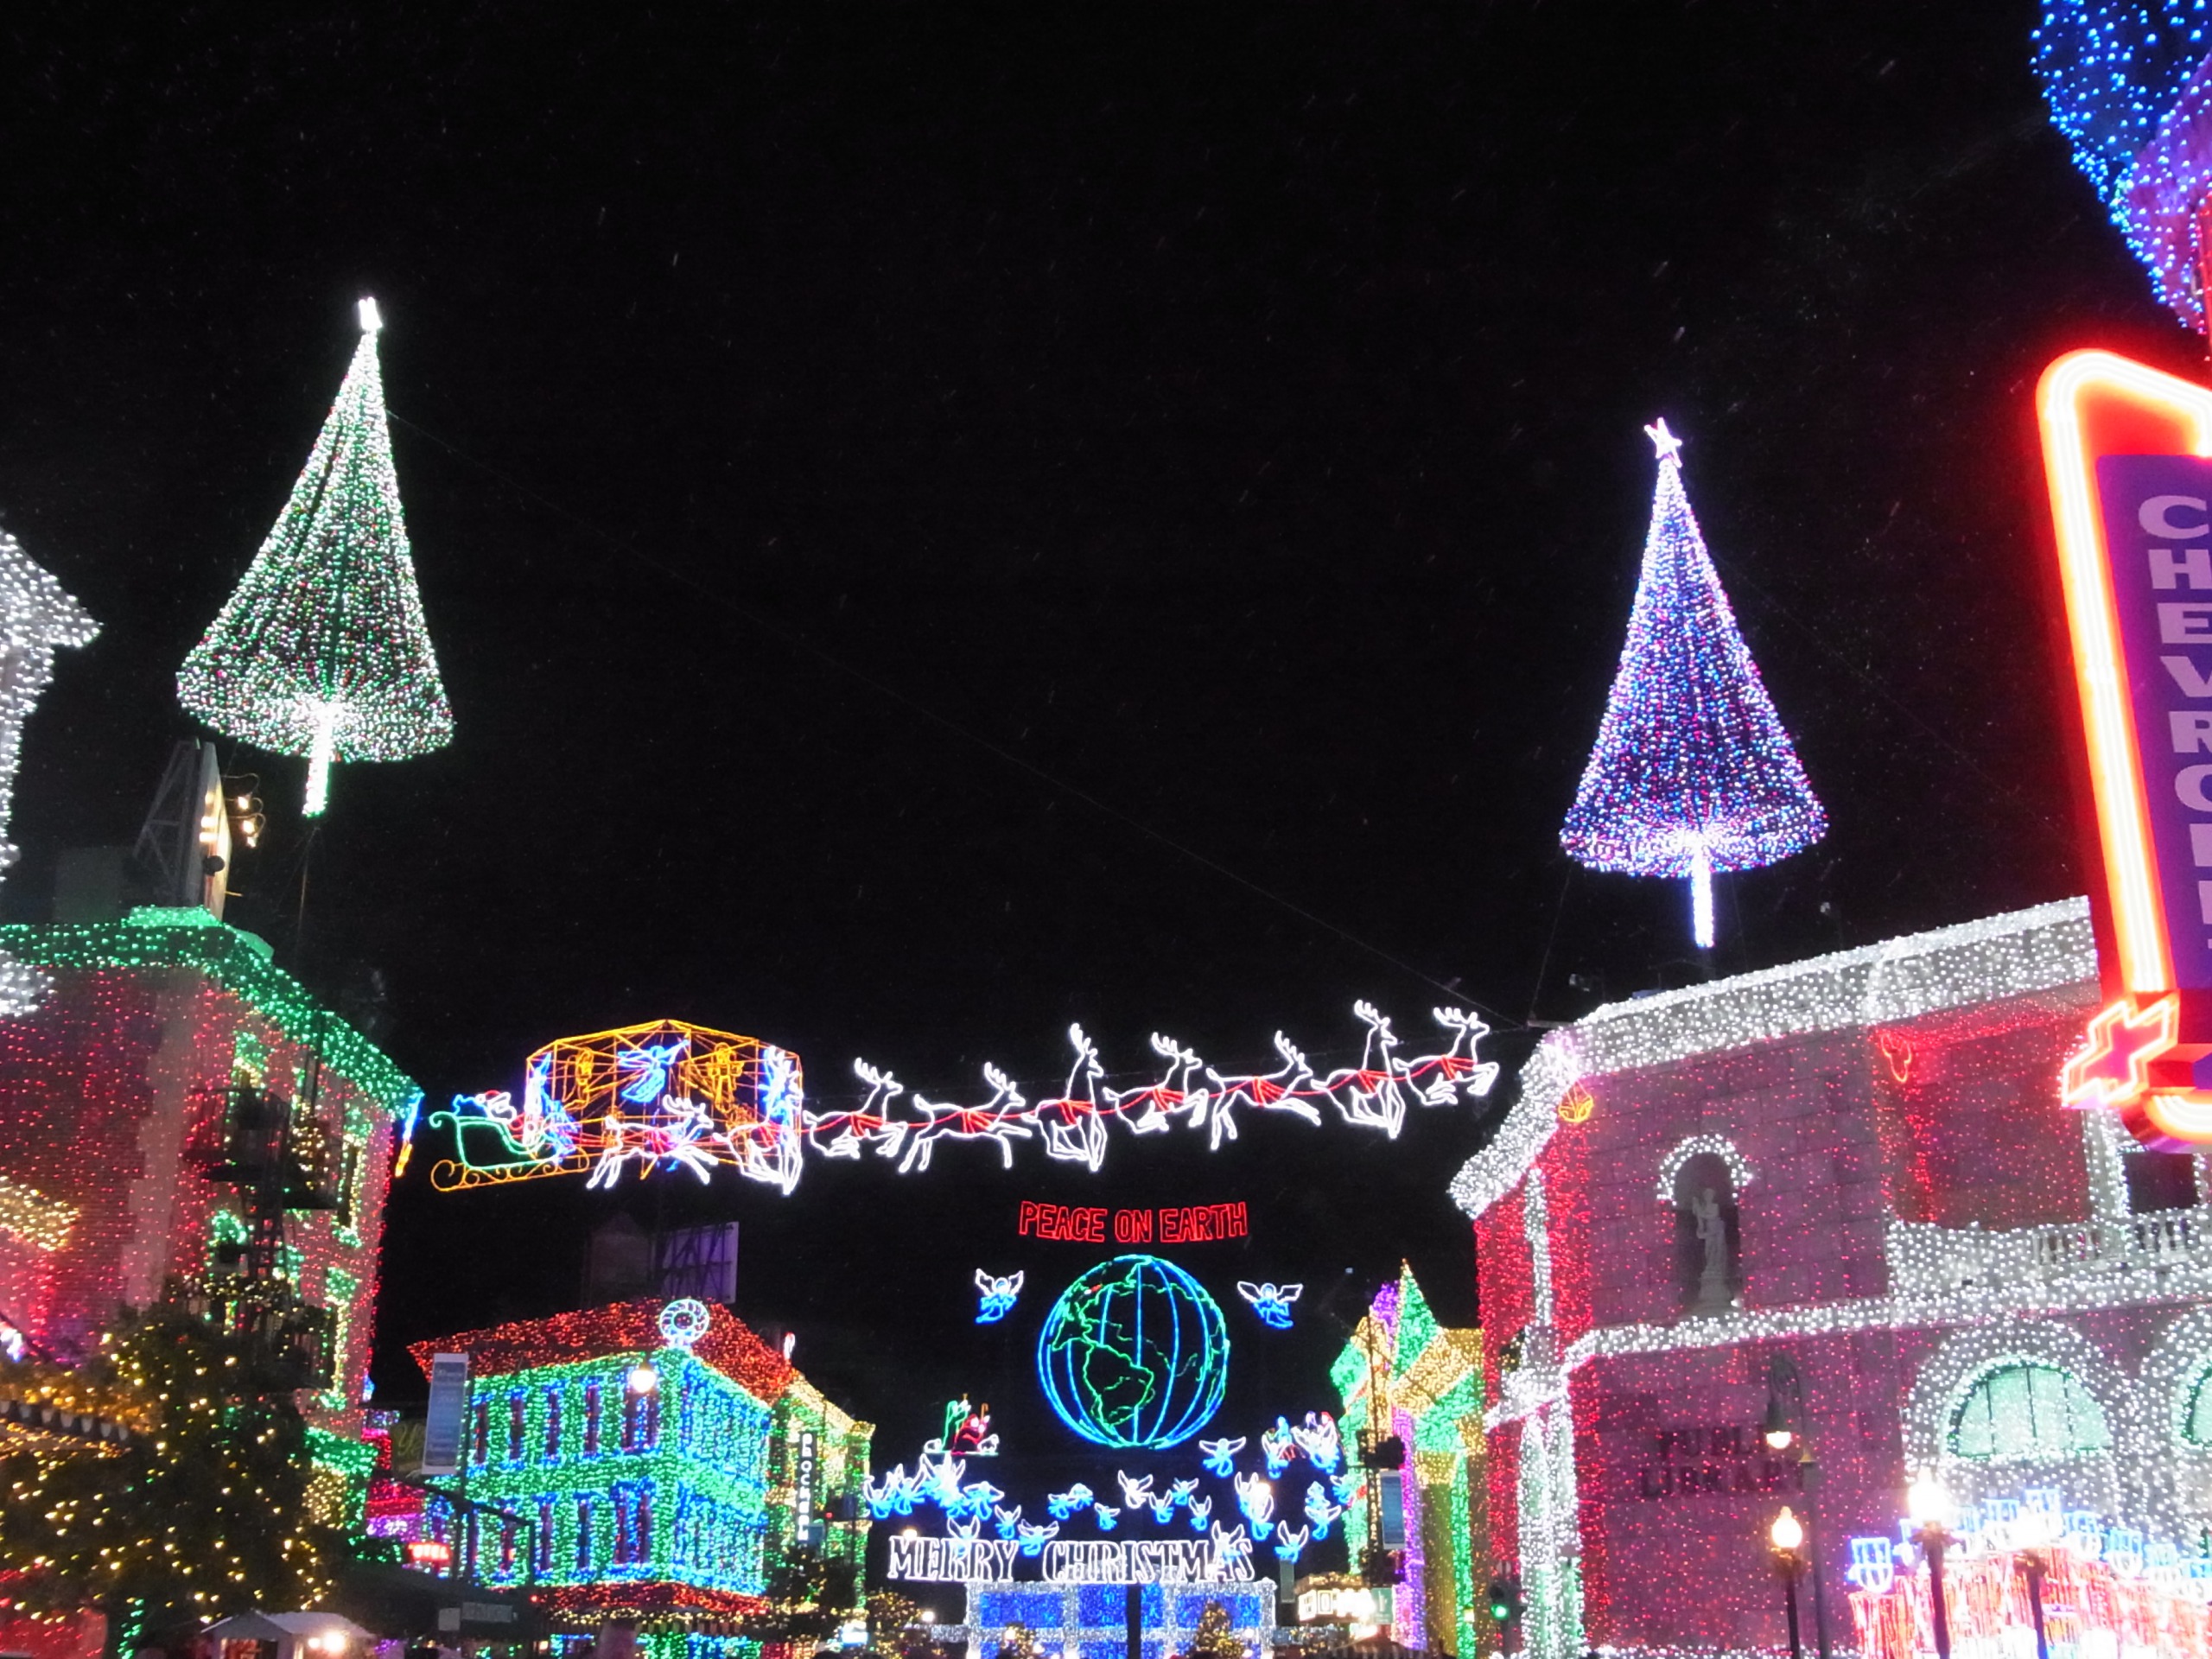 WDW旅行記 41 The Osborne Family Spectacle of Dancing Lights